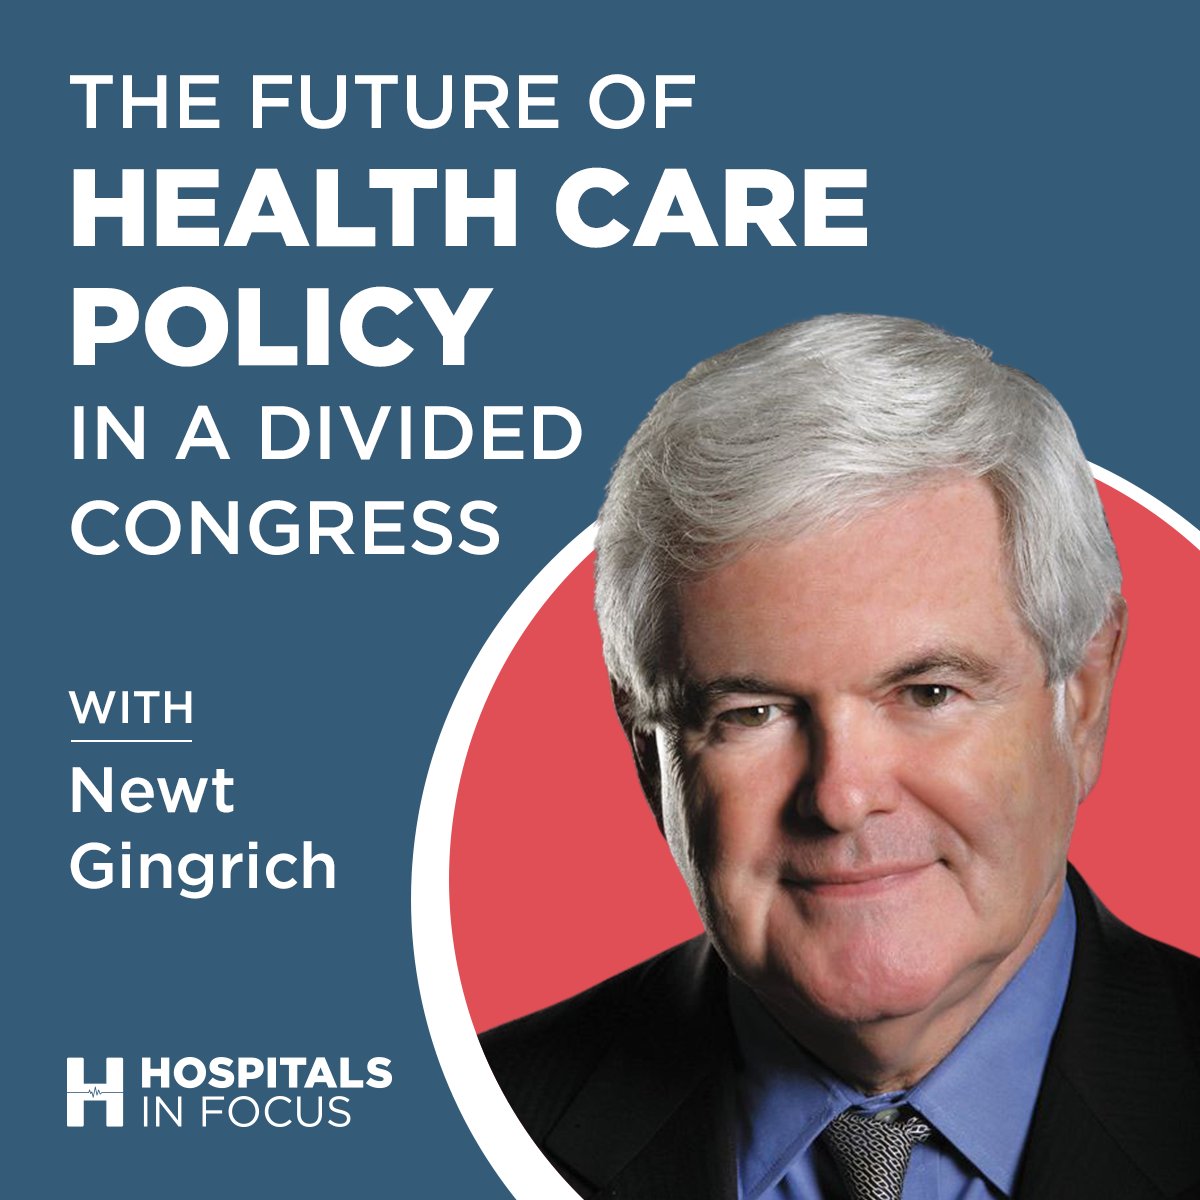 Always great to reconnect with @NewtGingrich - especially when we get to talk health care policy! In latest #HospitalsinFocus podcast, we discussed current dynamics on the Hill & implications for health care policy. Make sure to listen: bit.ly/3Yu2oAZ